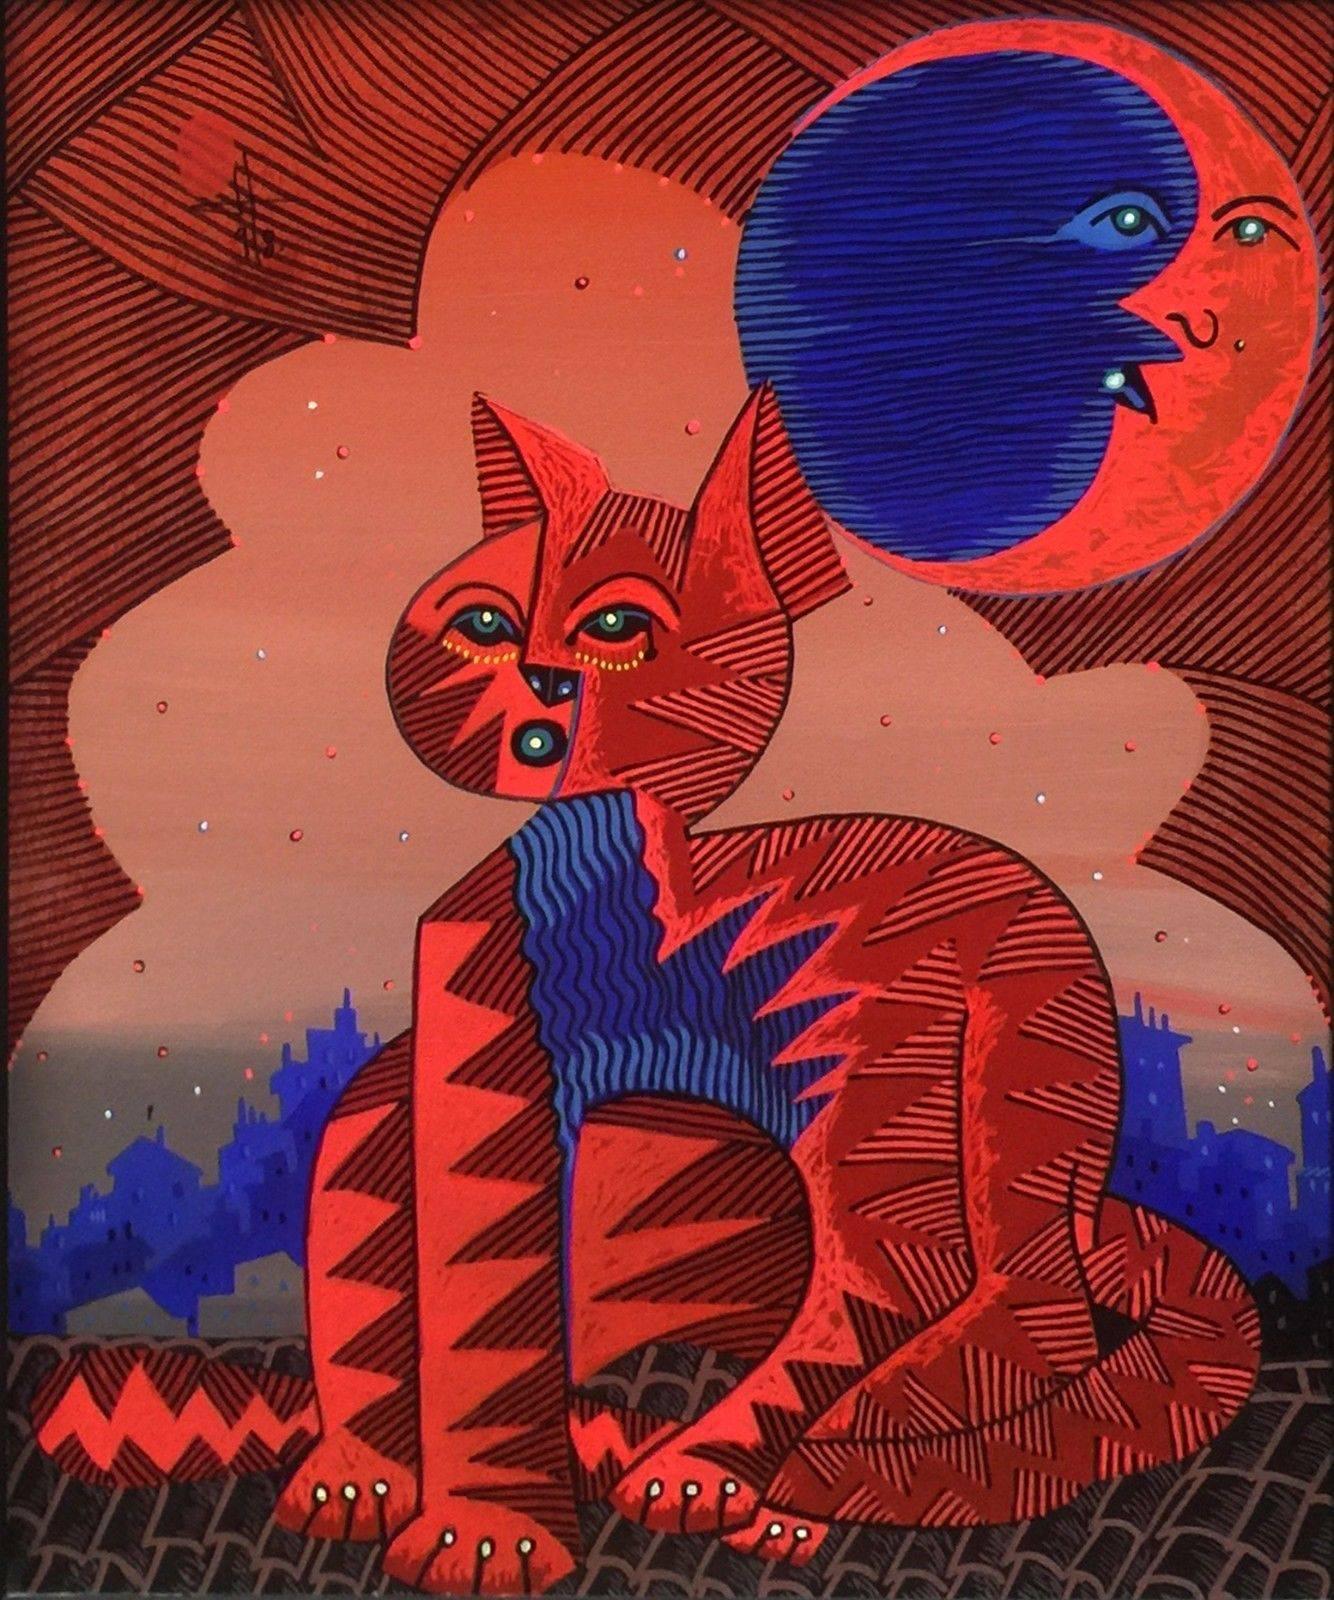 RED GATO - Painting by Jesus Fuertes